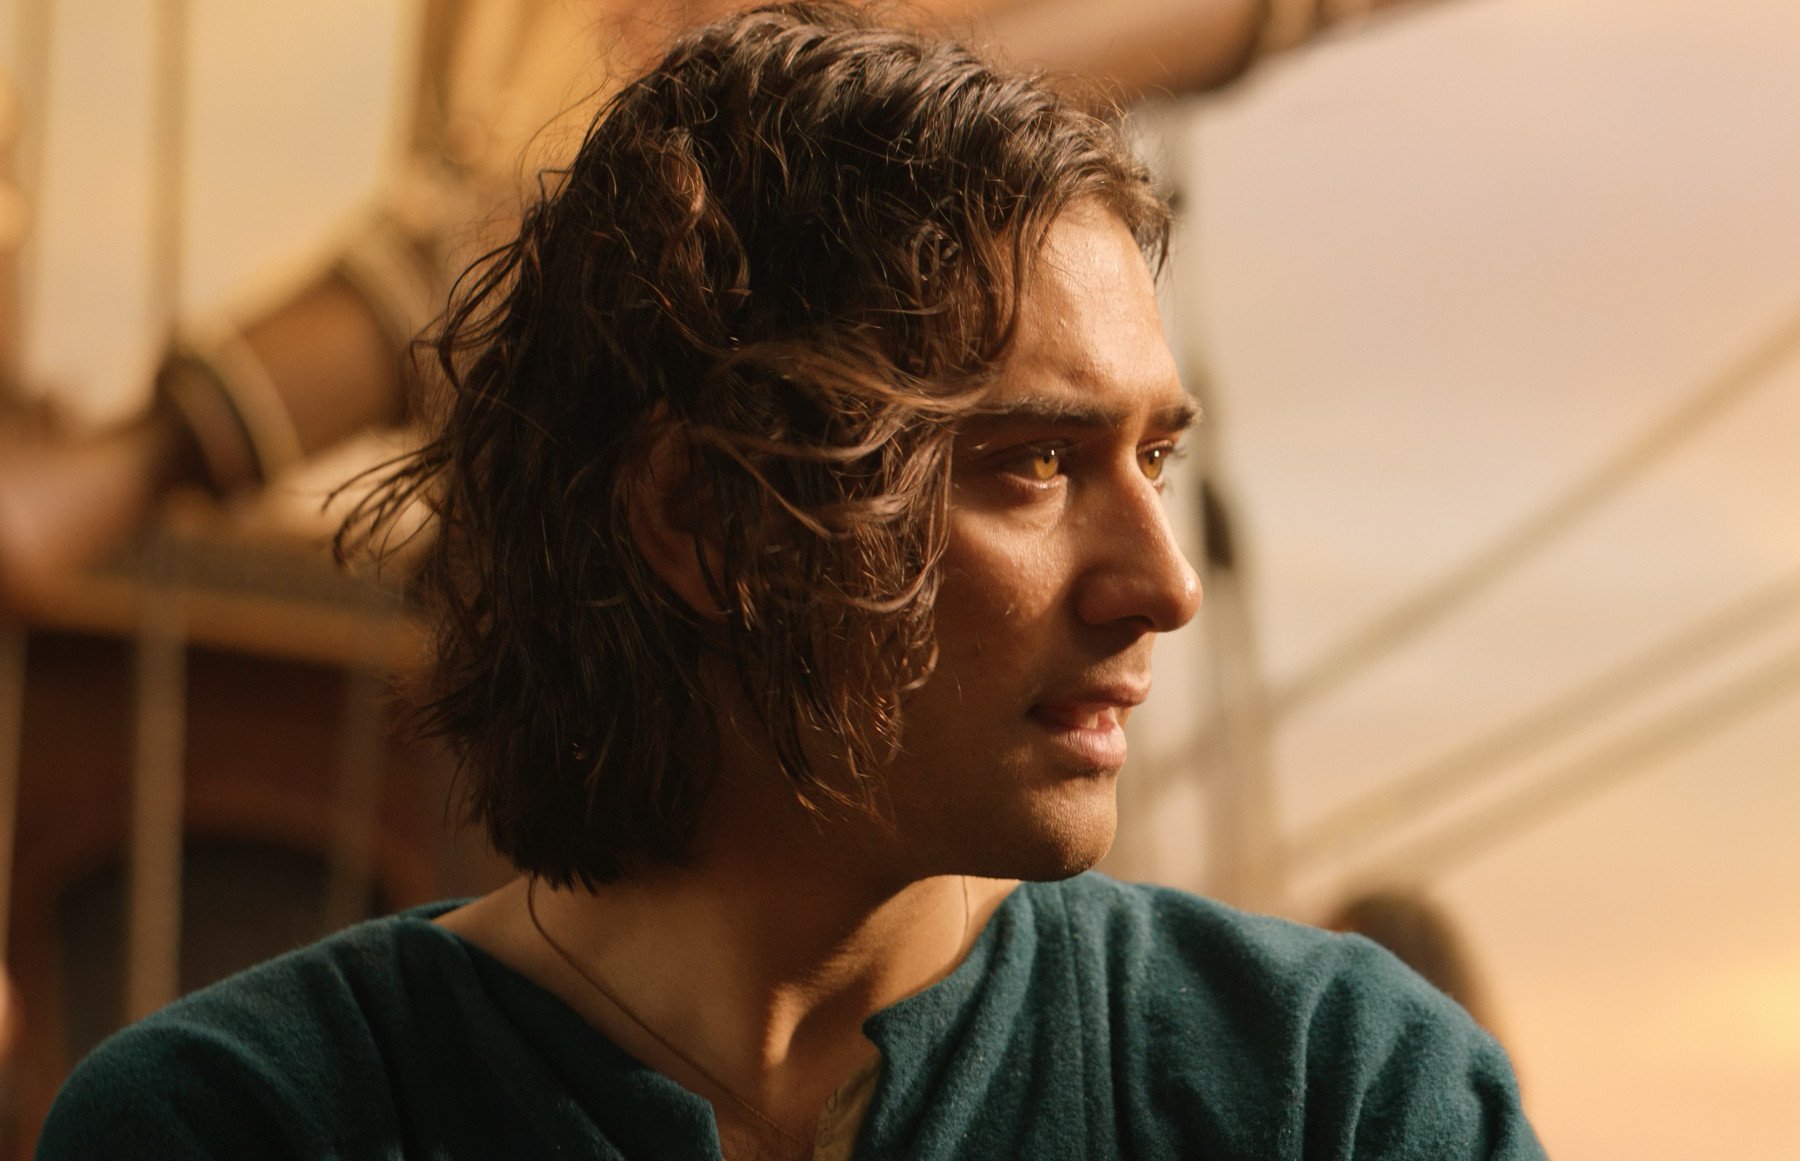 Maxim Baldry as Isildur for our article about the foreshadowing in 'The Rings of Power' Episode 5. In the photo, he's wearing a green shirt, on a ship, and looking out at the sea.